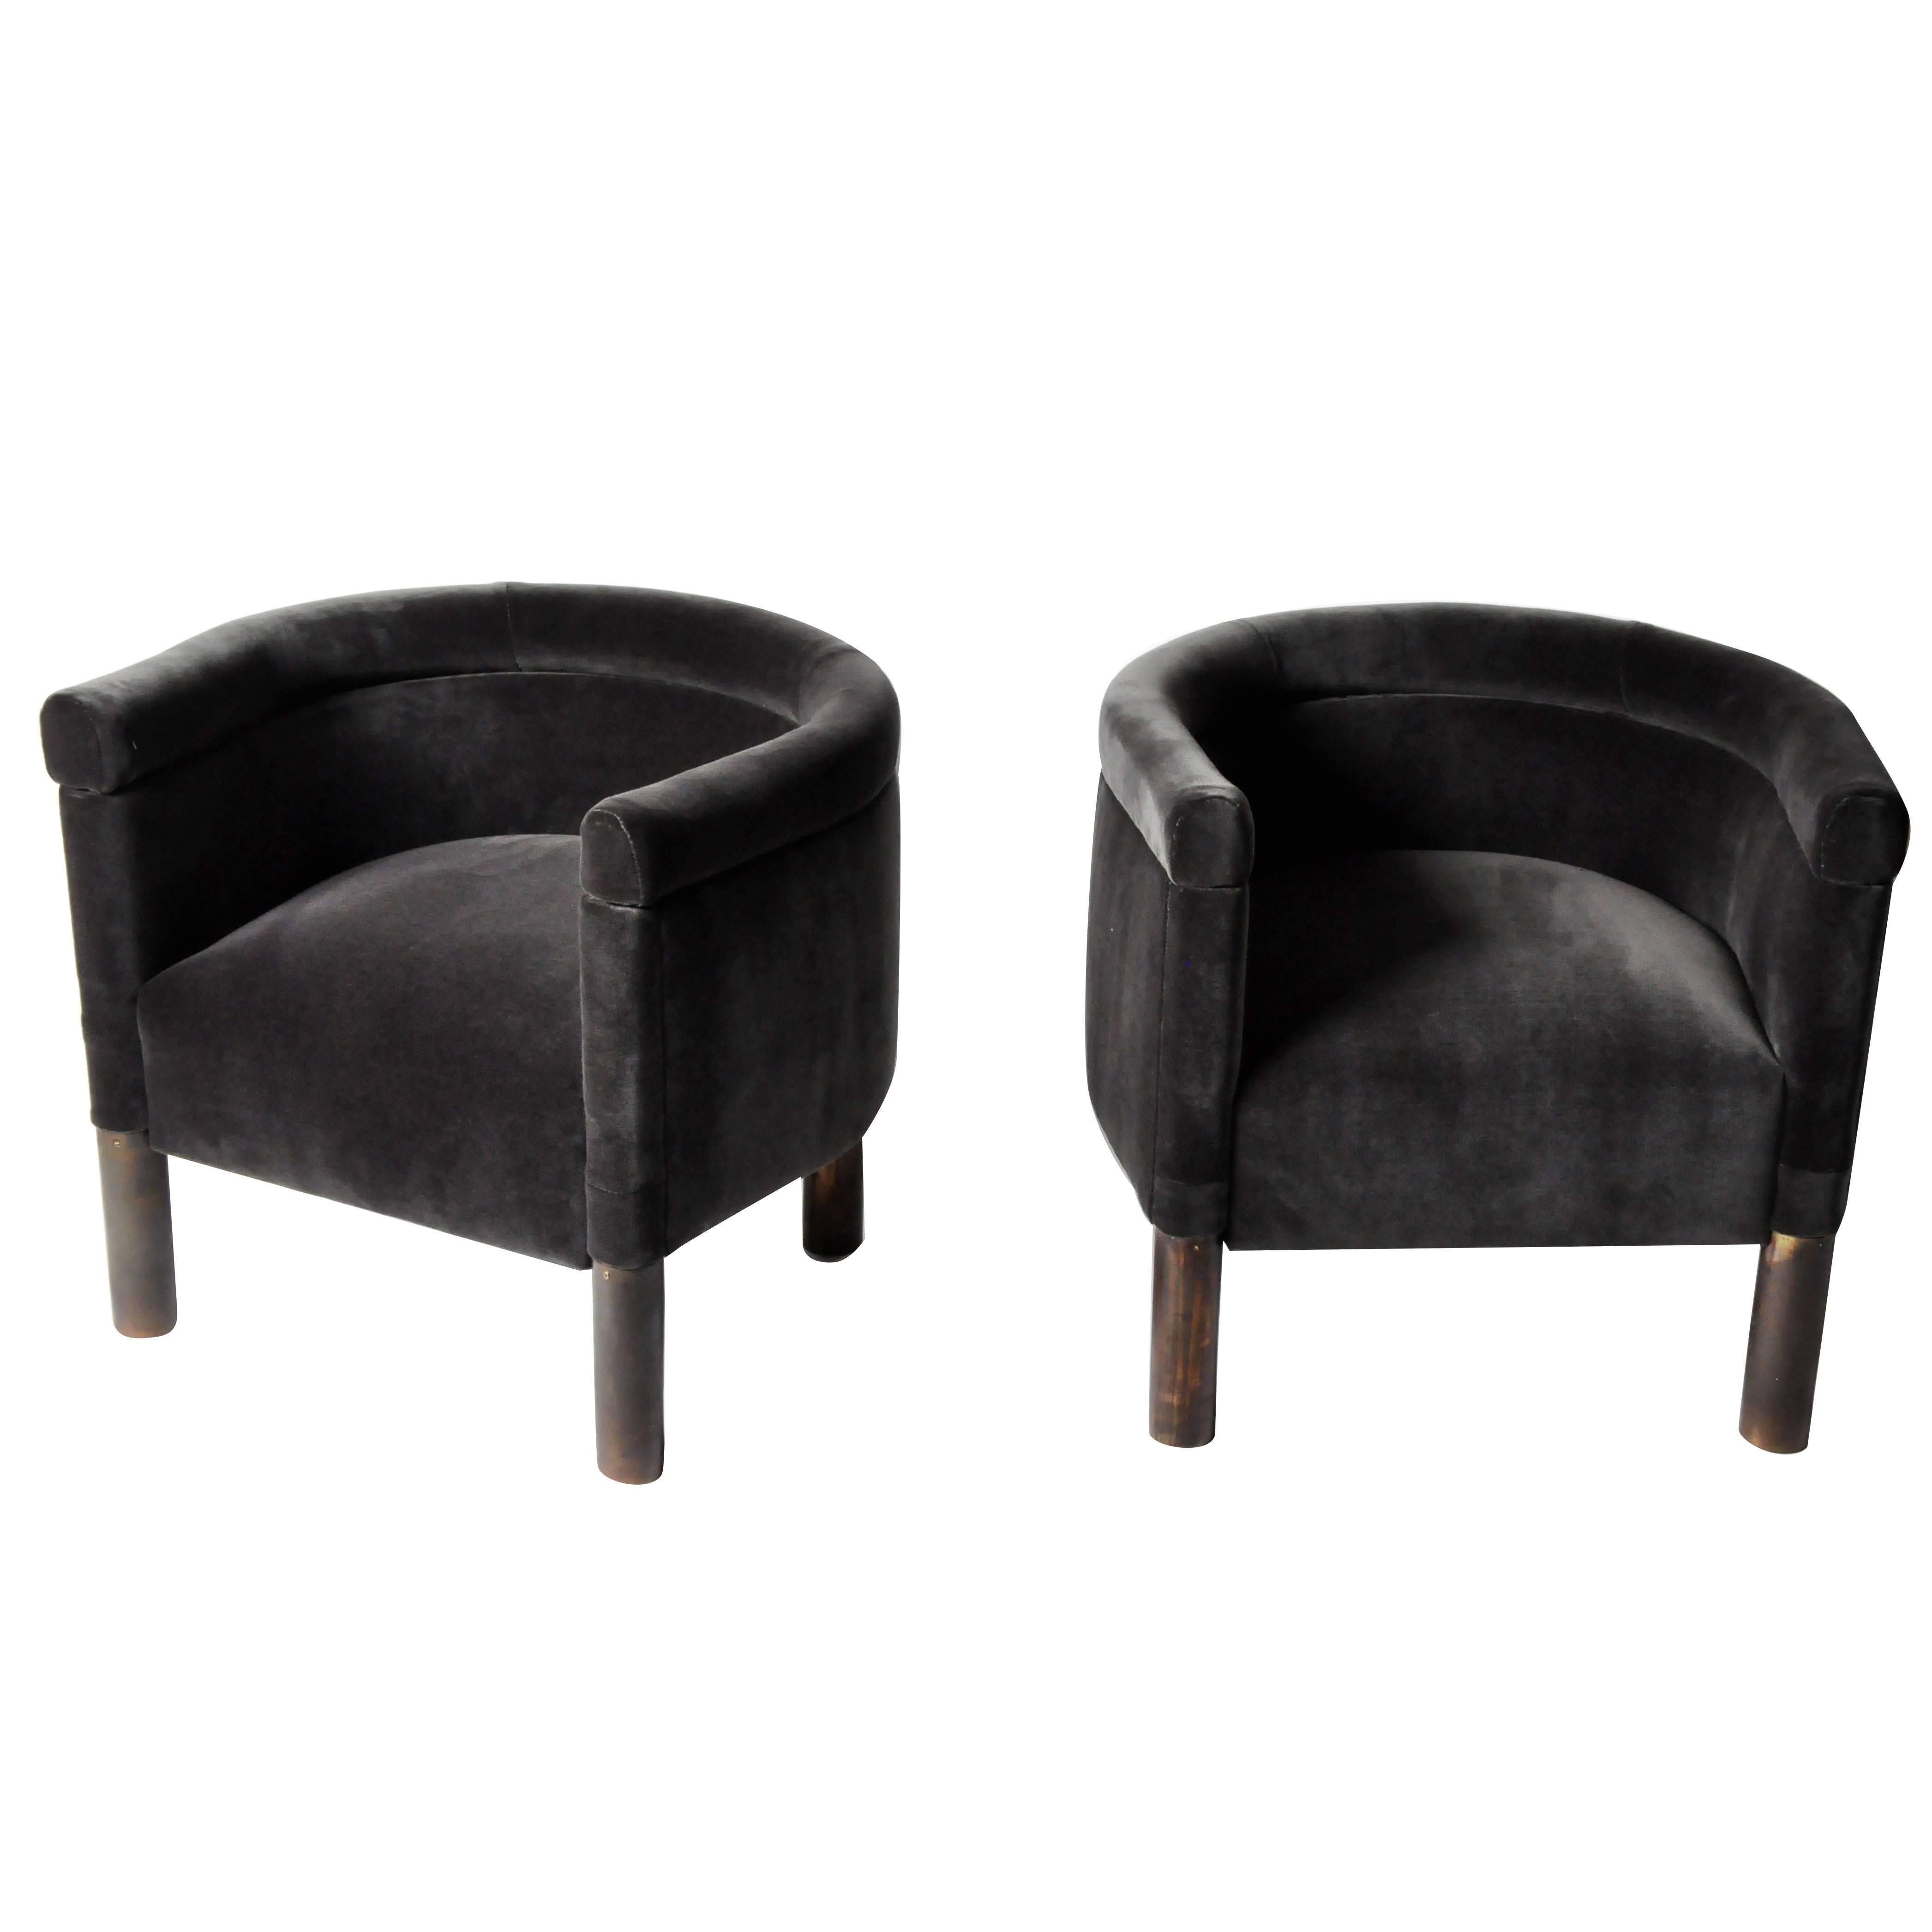 Pair of Round-Back Chairs